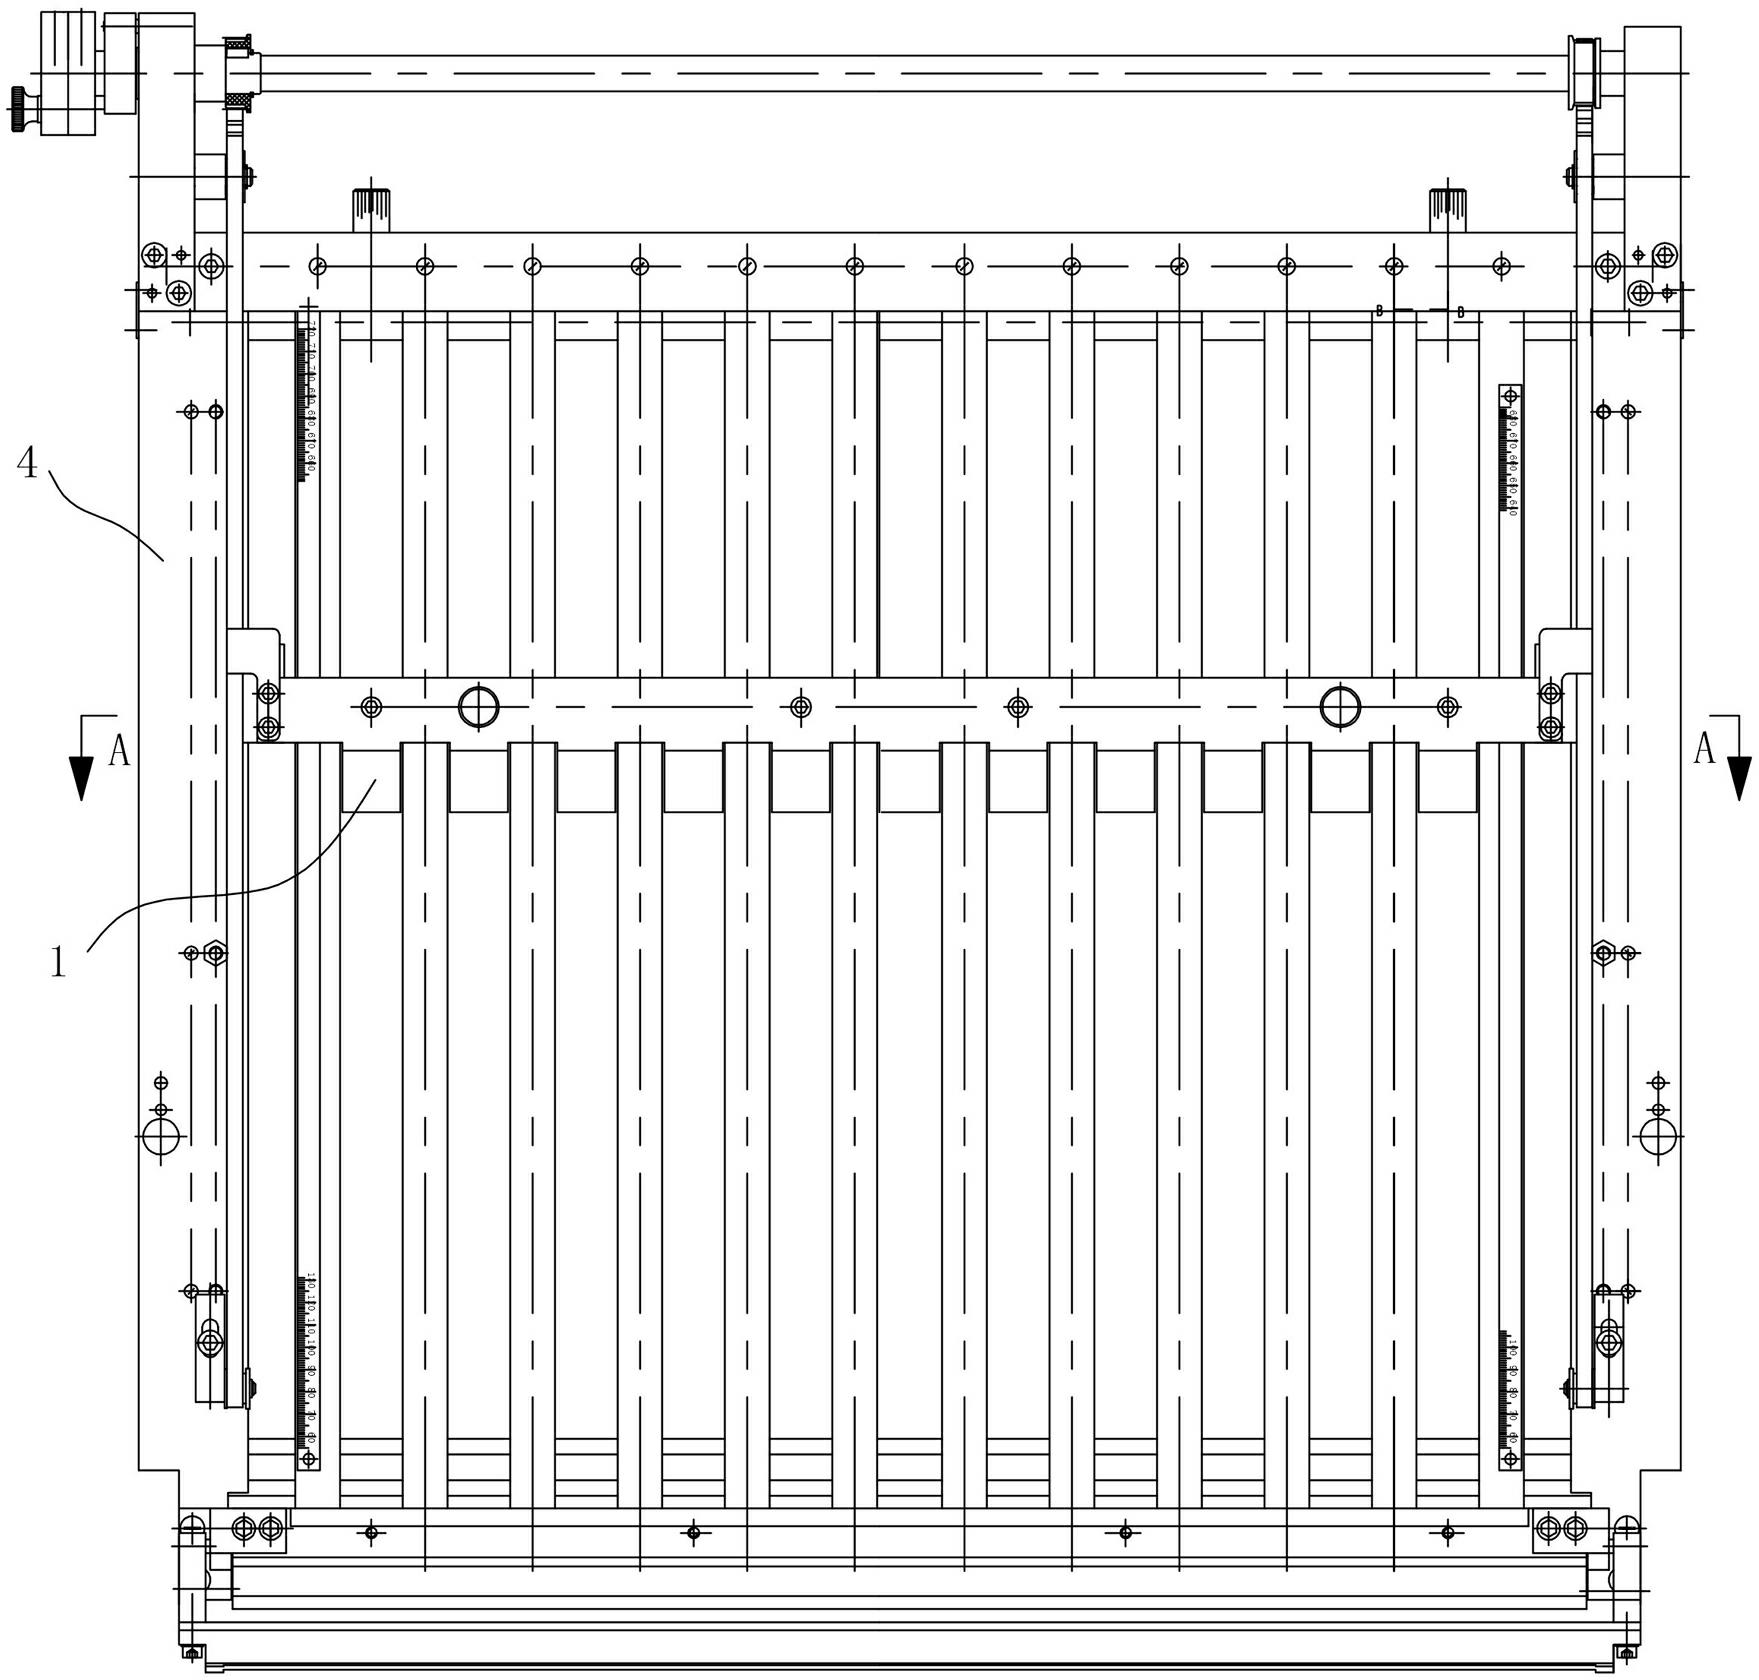 Folding machine fence board with front gauge guiding device